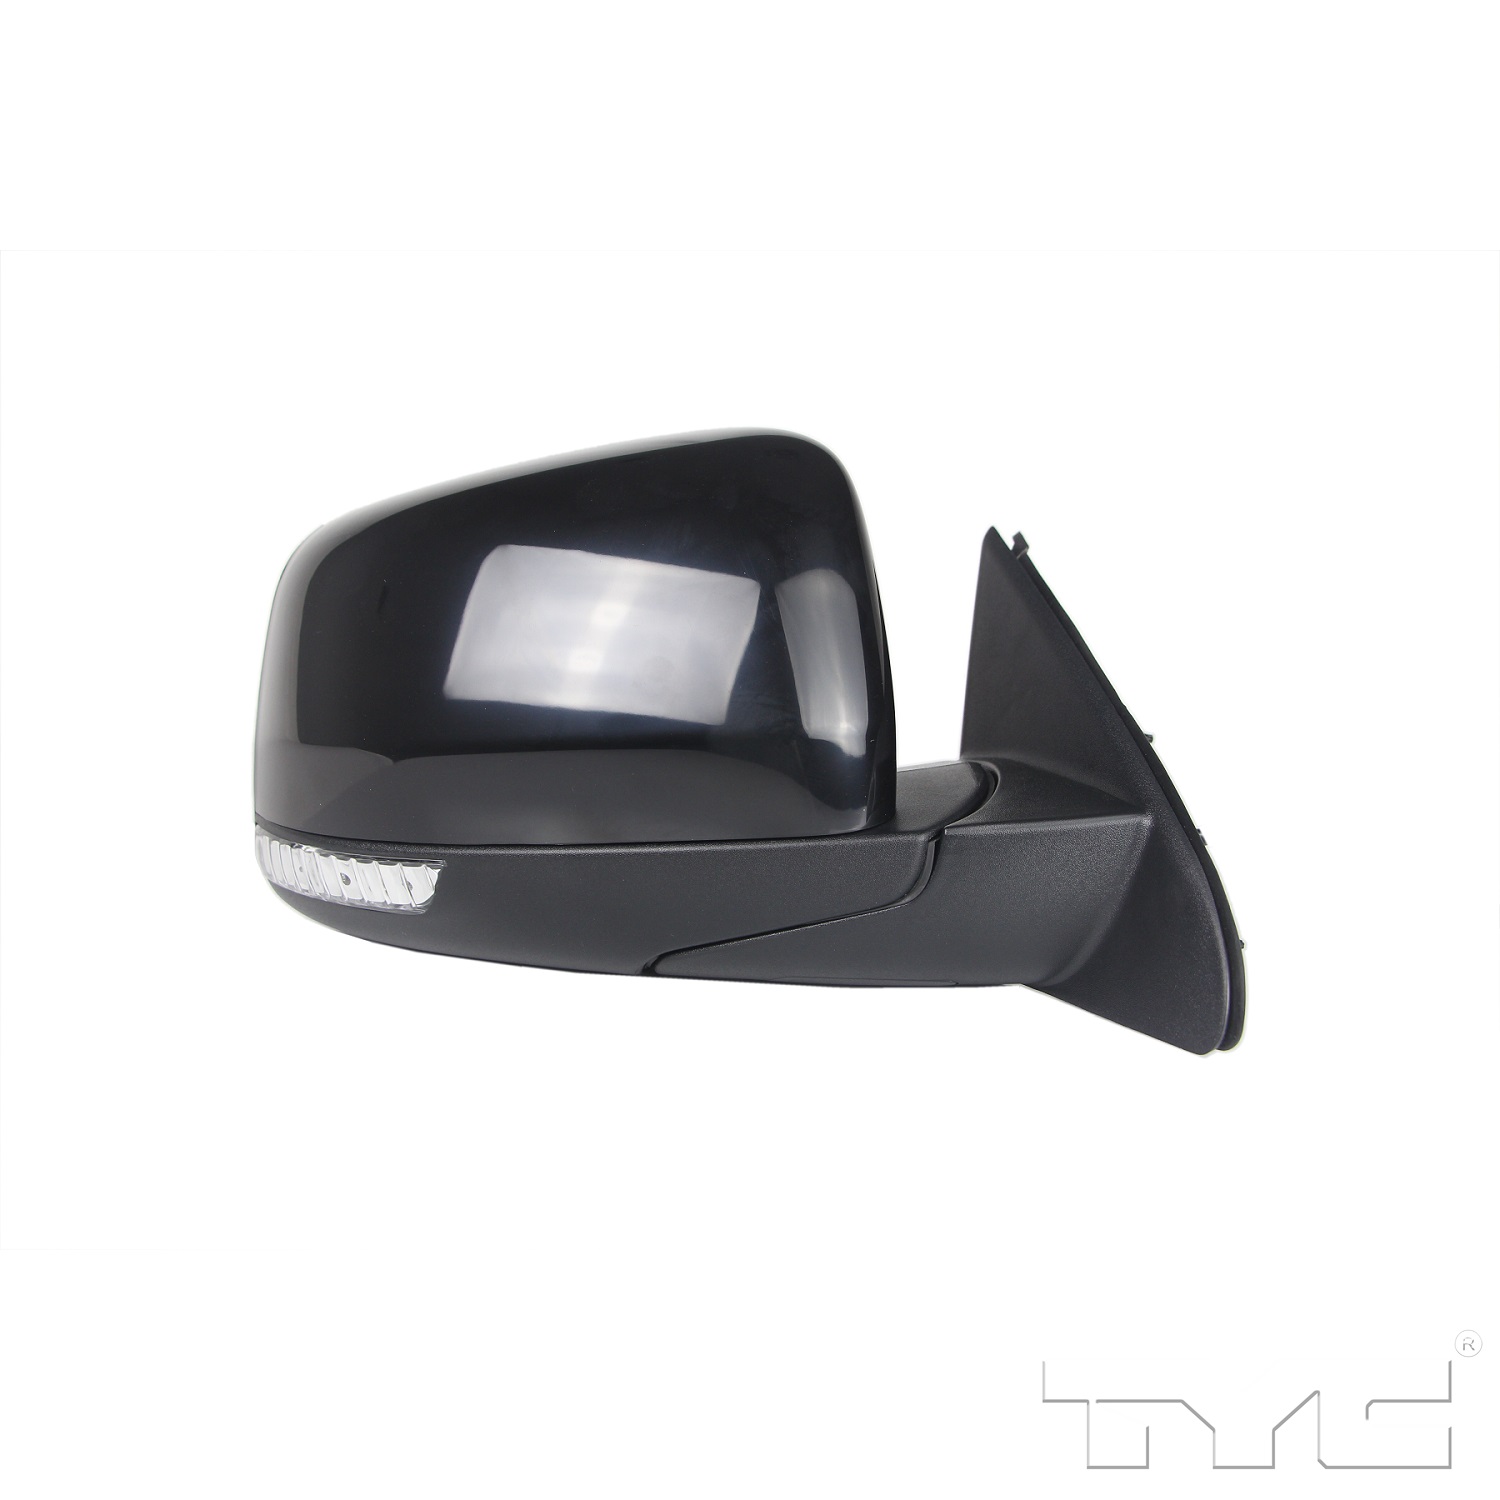 Aftermarket MIRRORS for JEEP - GRAND CHEROKEE WK, GRAND CHEROKEE WK,22-22,RT Mirror outside rear view